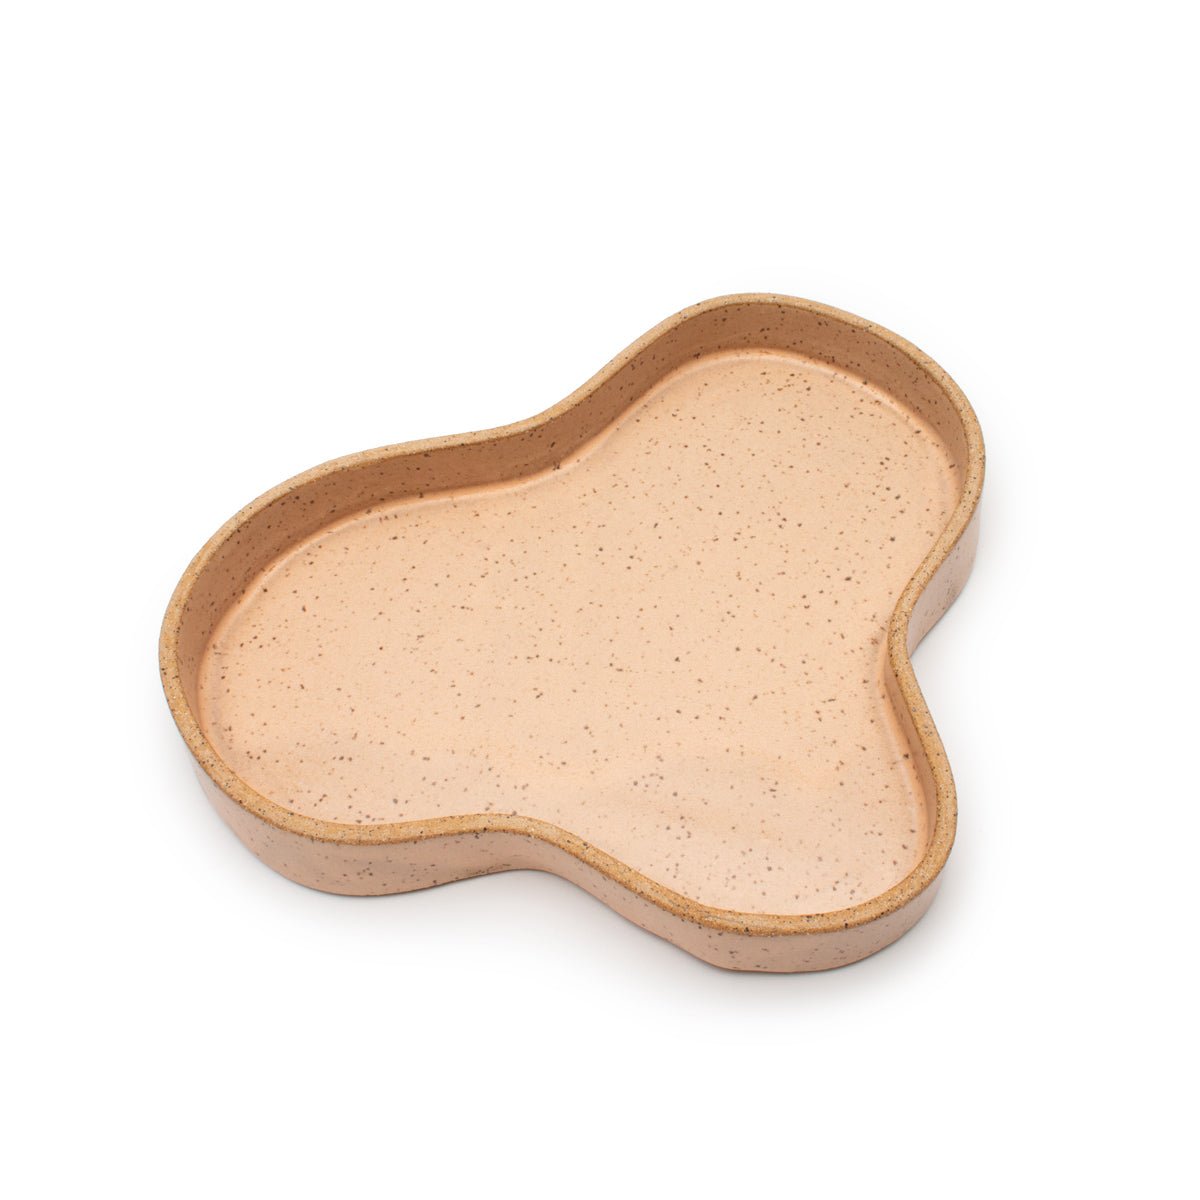 A pink blob tray centered on a white background. The Blob Tray in Pink is designed and handmade by Kohai Ceramics in Portland, OR.